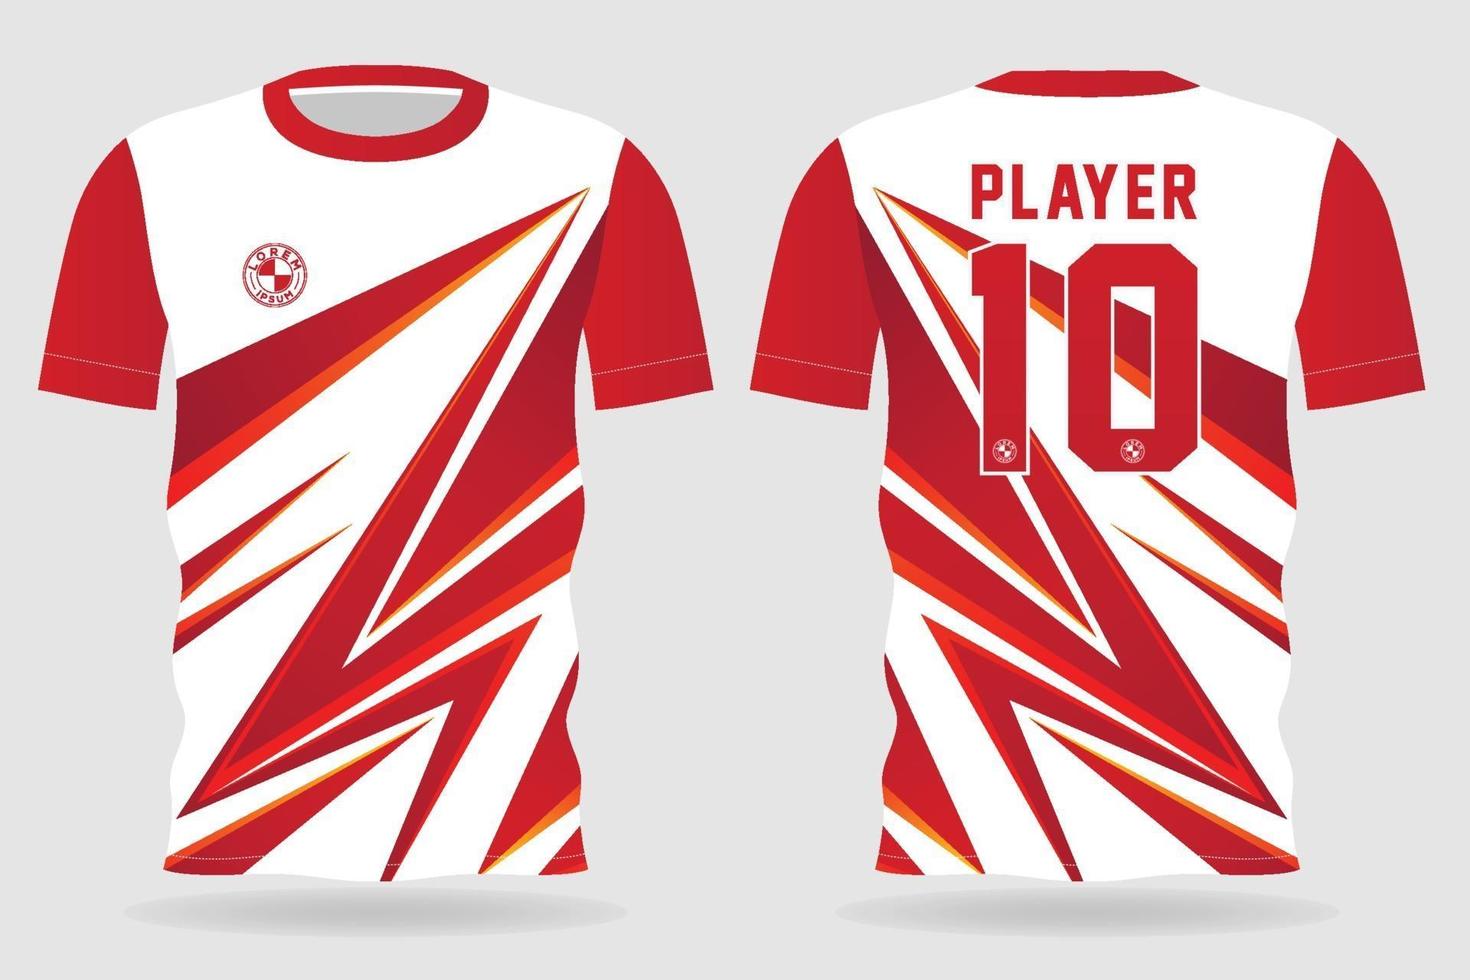 https://static.vecteezy.com/system/resources/previews/002/436/198/non_2x/red-white-sports-jersey-template-for-team-uniforms-and-soccer-t-shirt-design-vector.jpg